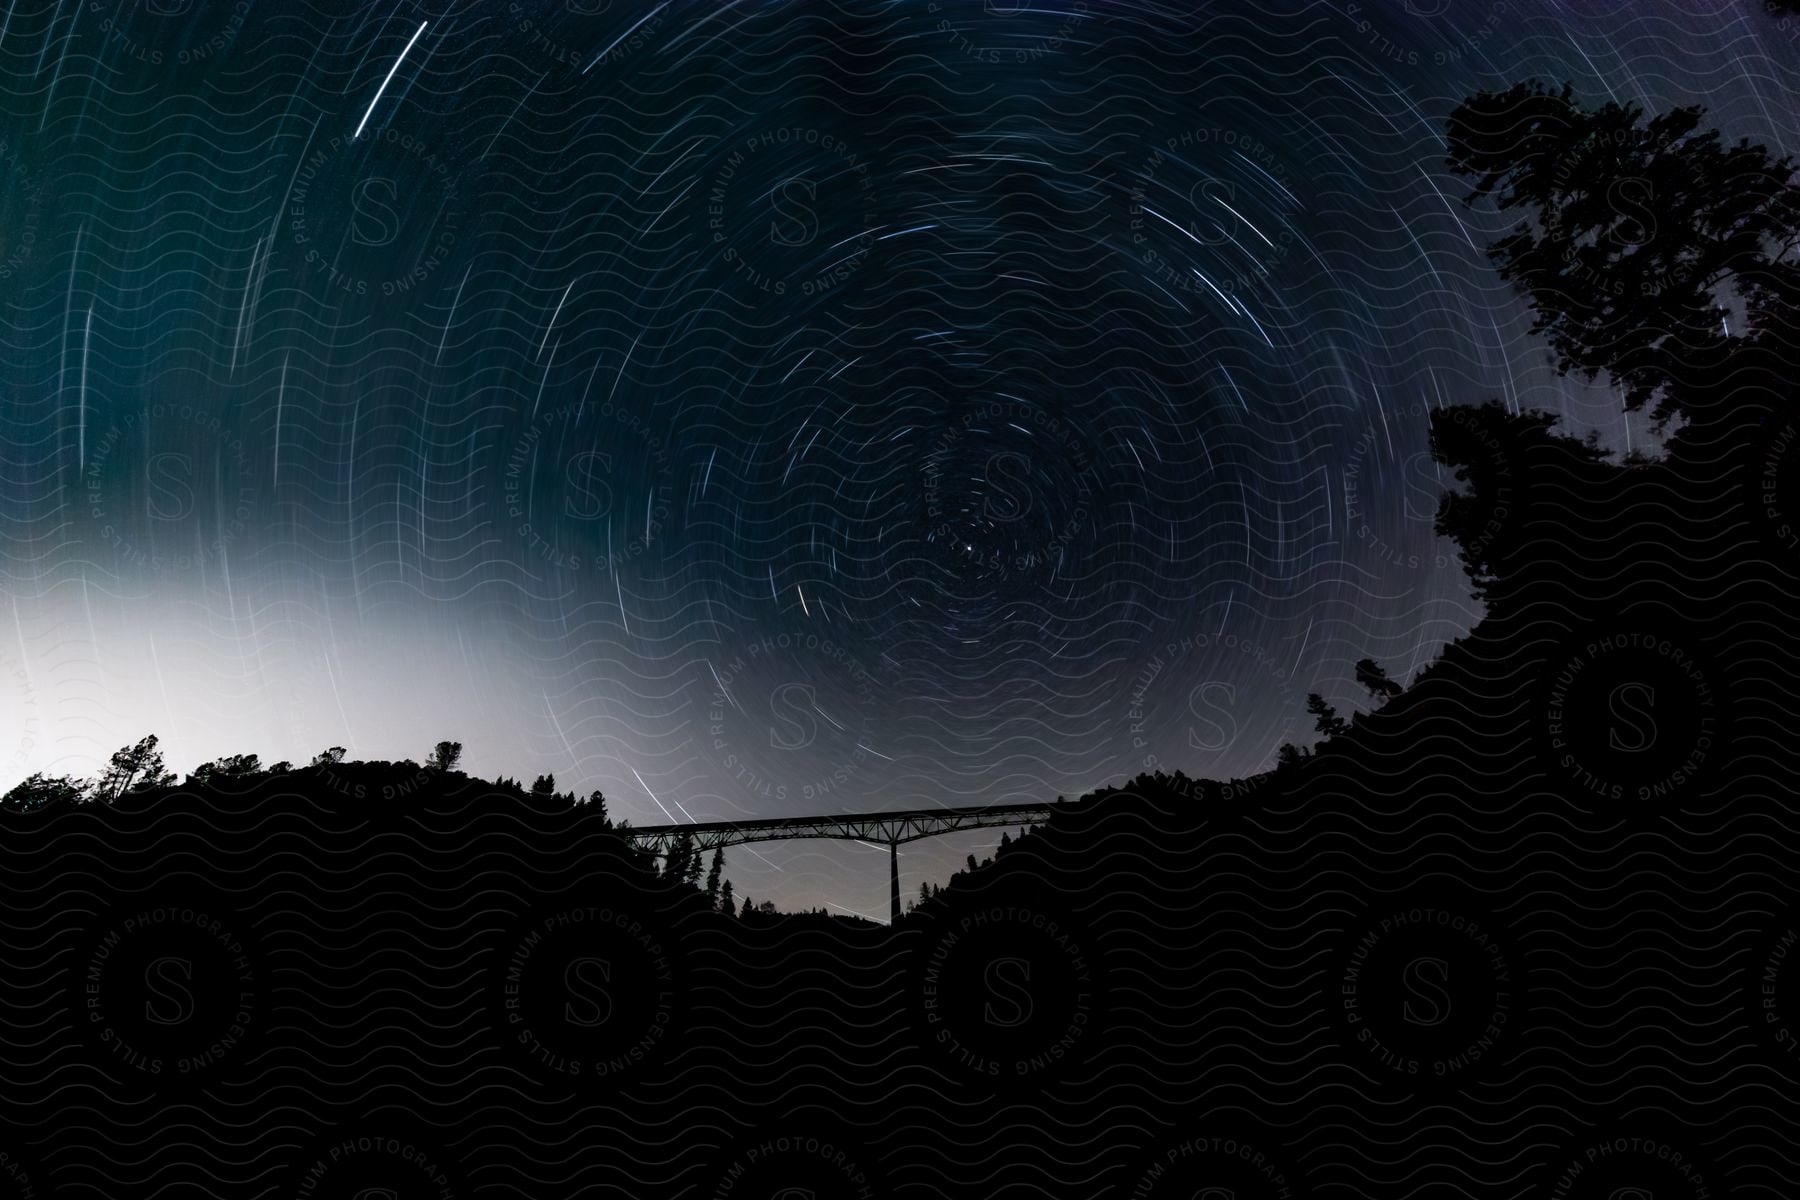 Forest and bridge silhouetted against the starry sky at night in deception pass state park